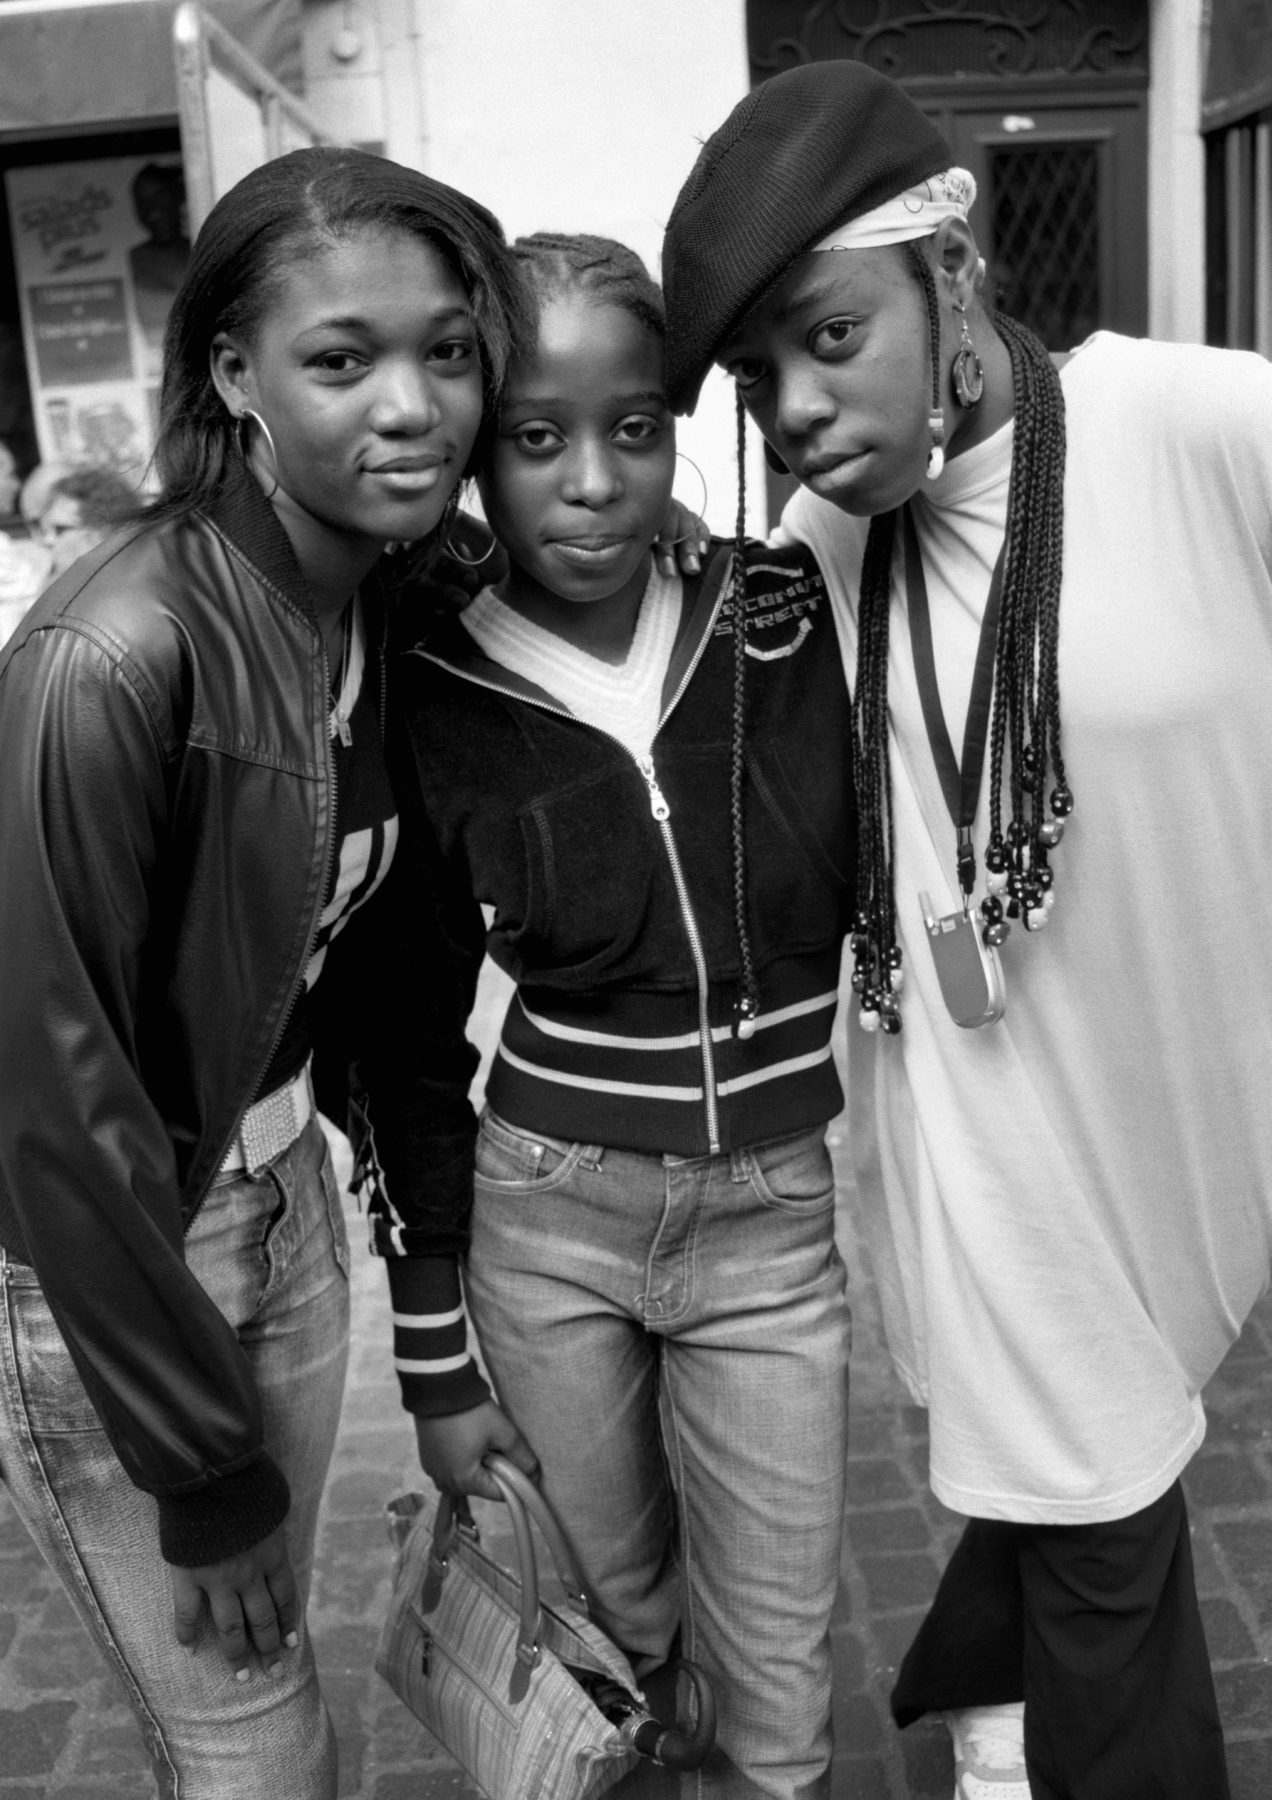 Street Photography, Paris, Les Halles, Streetwear, Mohamed Bourouissa, Black Teenage Girls in Paris, Exhibition at The Gallery at VCUarts Qatar